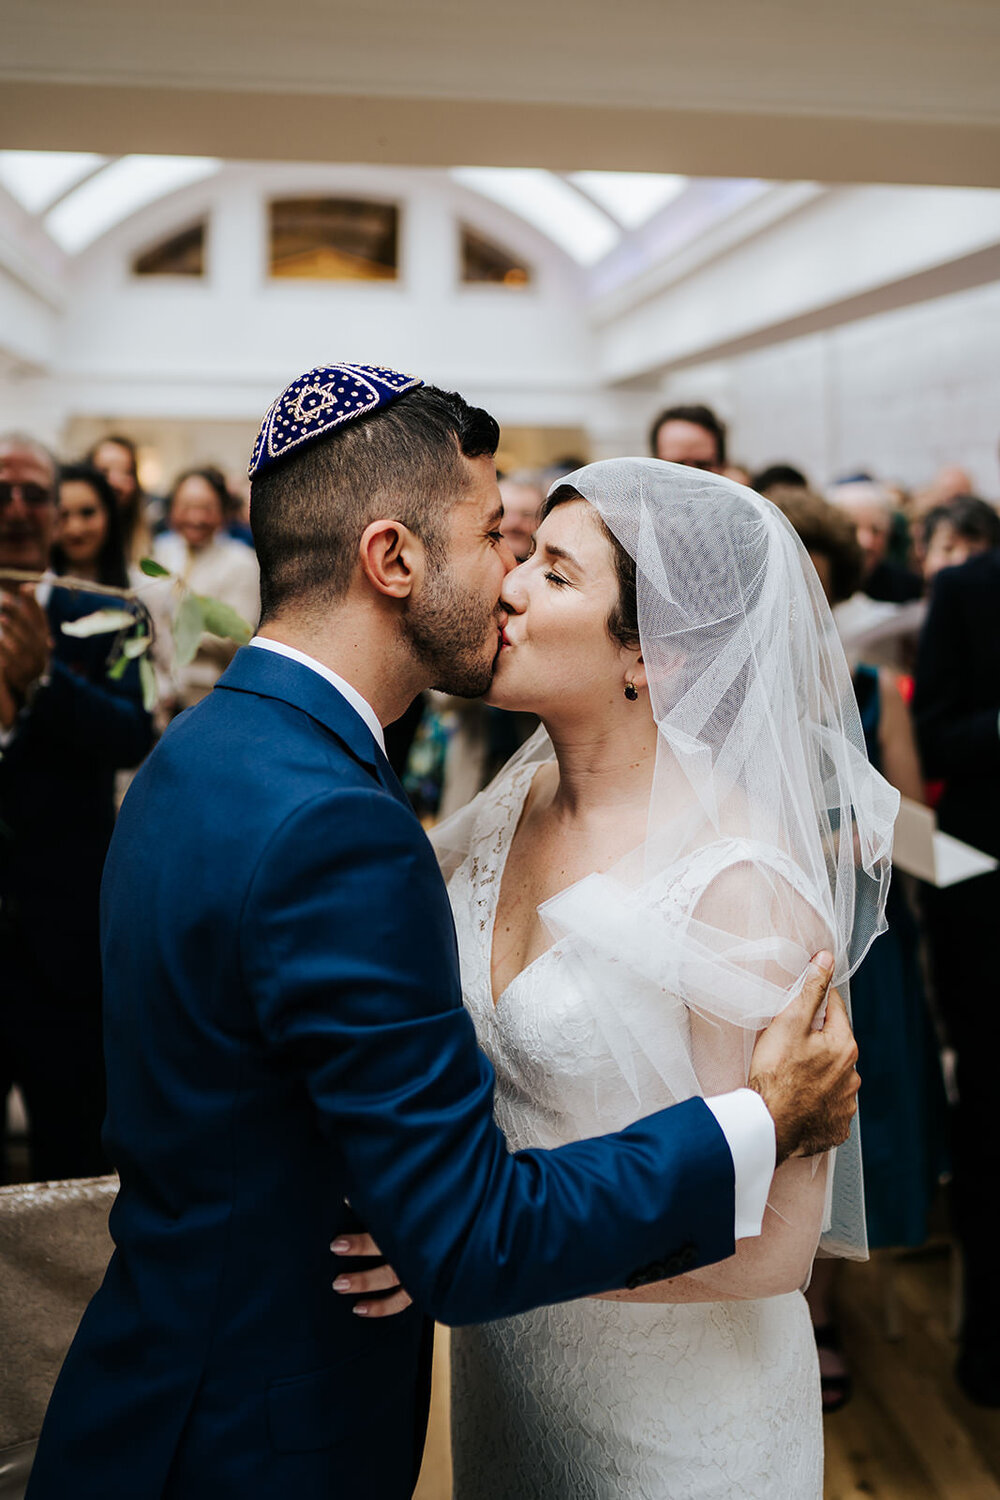 Bride and groom share a first kiss during Jewish wedding ceremony at Pembroke Lodge Wedding in Richmond, London